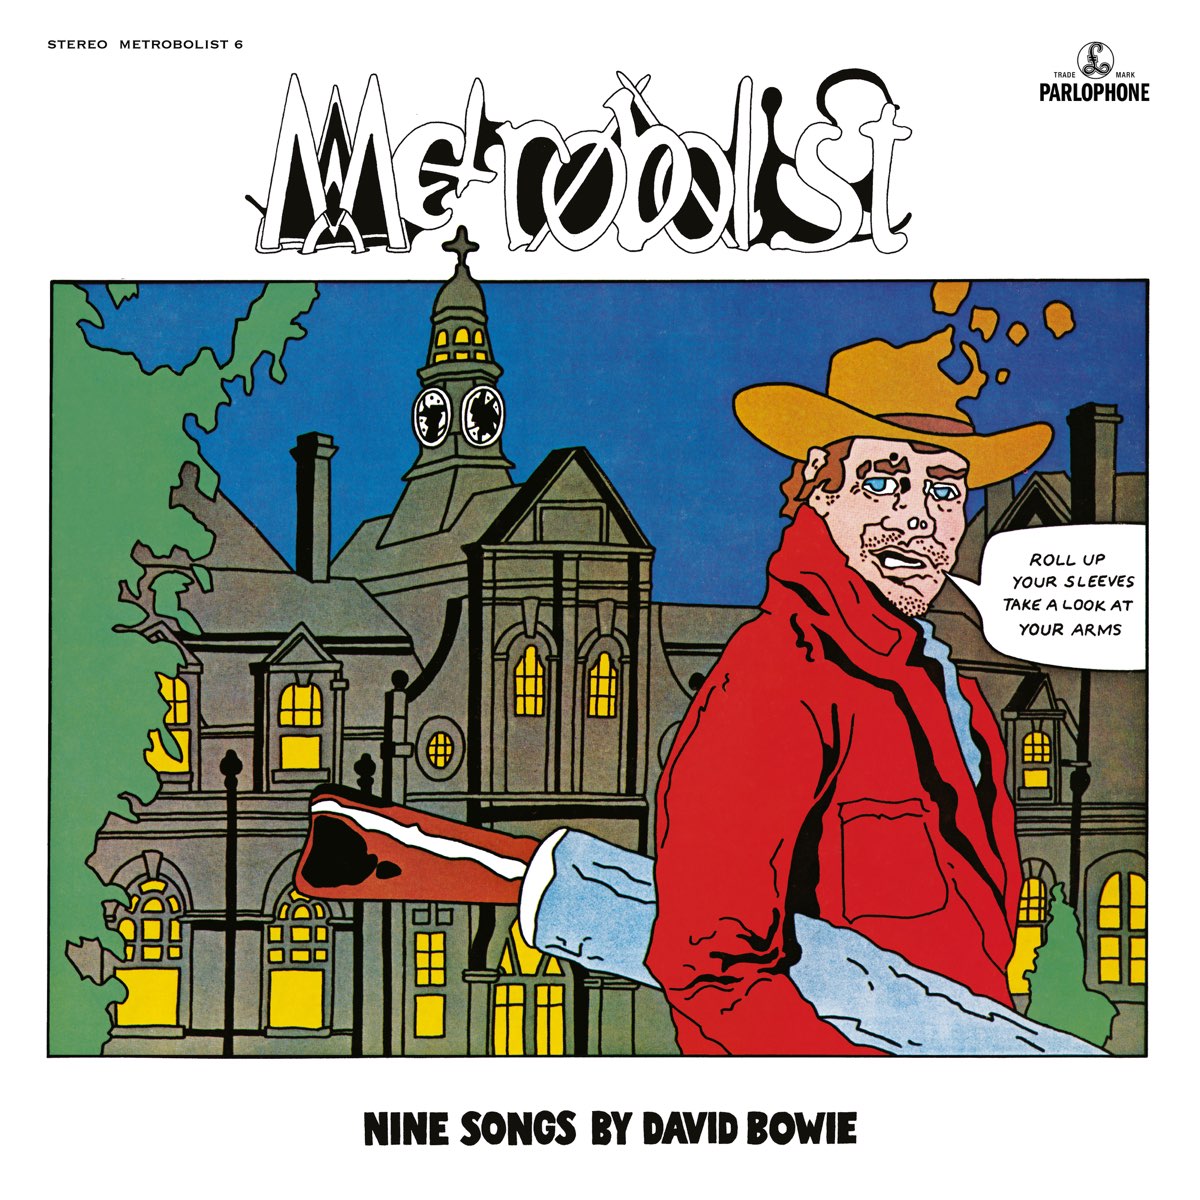 ‎metrobolist Aka The Man Who Sold The World [2020 Mix] By David Bowie On Apple Music